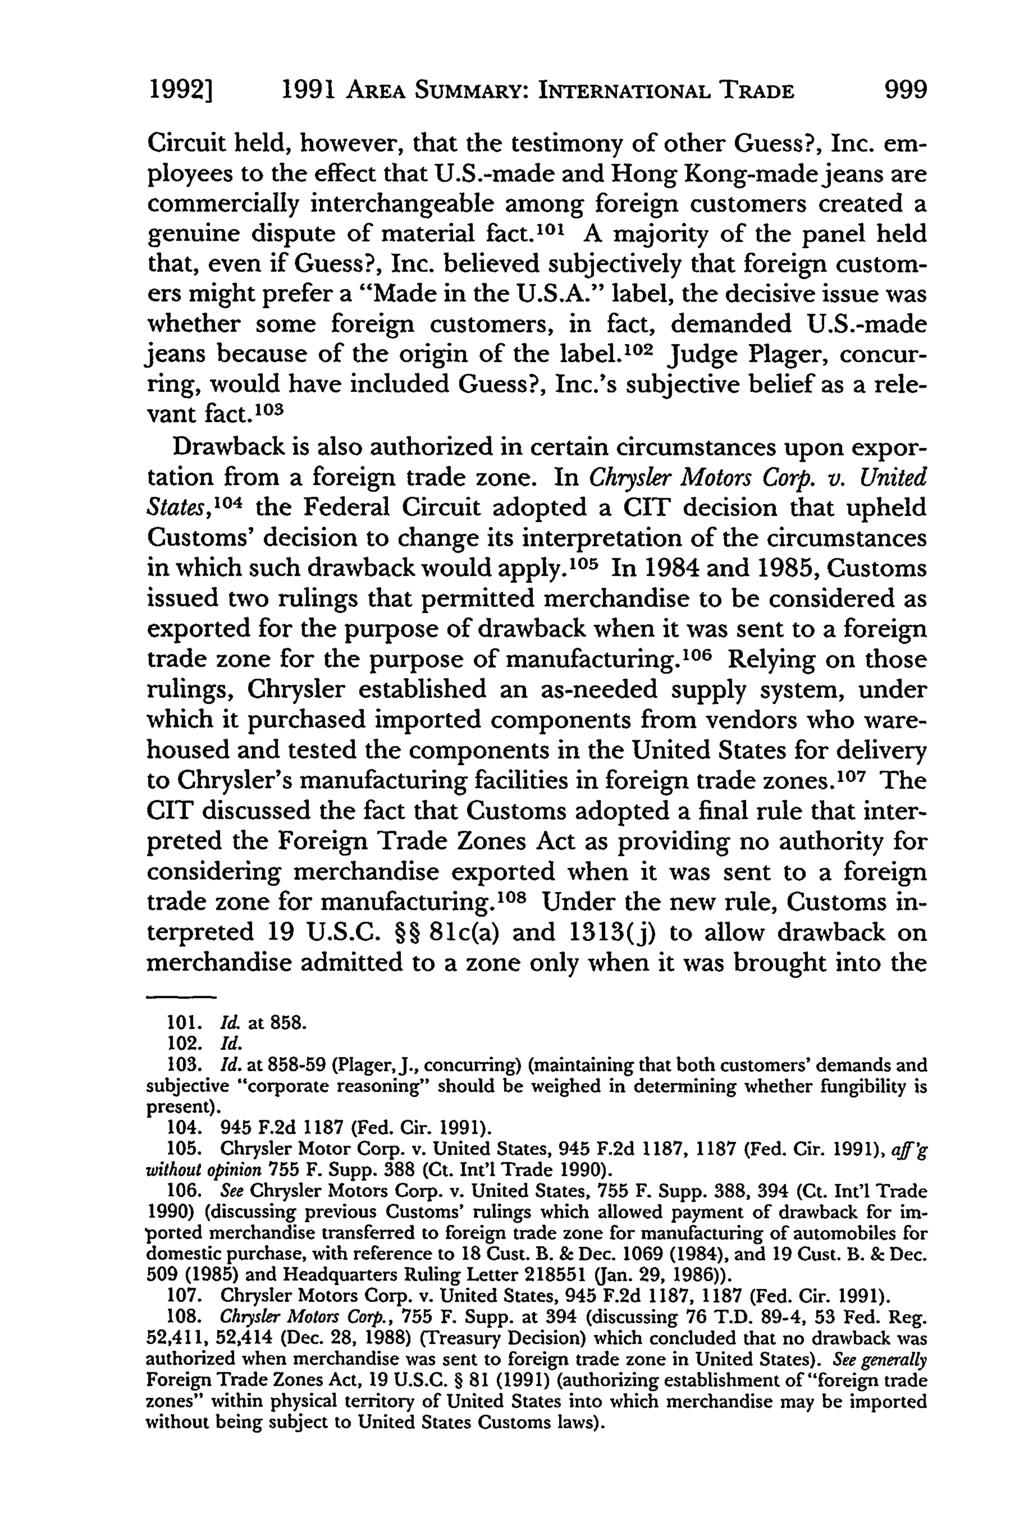 1992] 1991 AREA SUMMARY: INTERNATIONAL TRADE 999 Circuit held, however, that the testimony of other Guess?, Inc. employees to the effect that U.S.-made and Hong Kong-madejeans are commercially interchangeable among foreign customers created a genuine dispute of material fact.